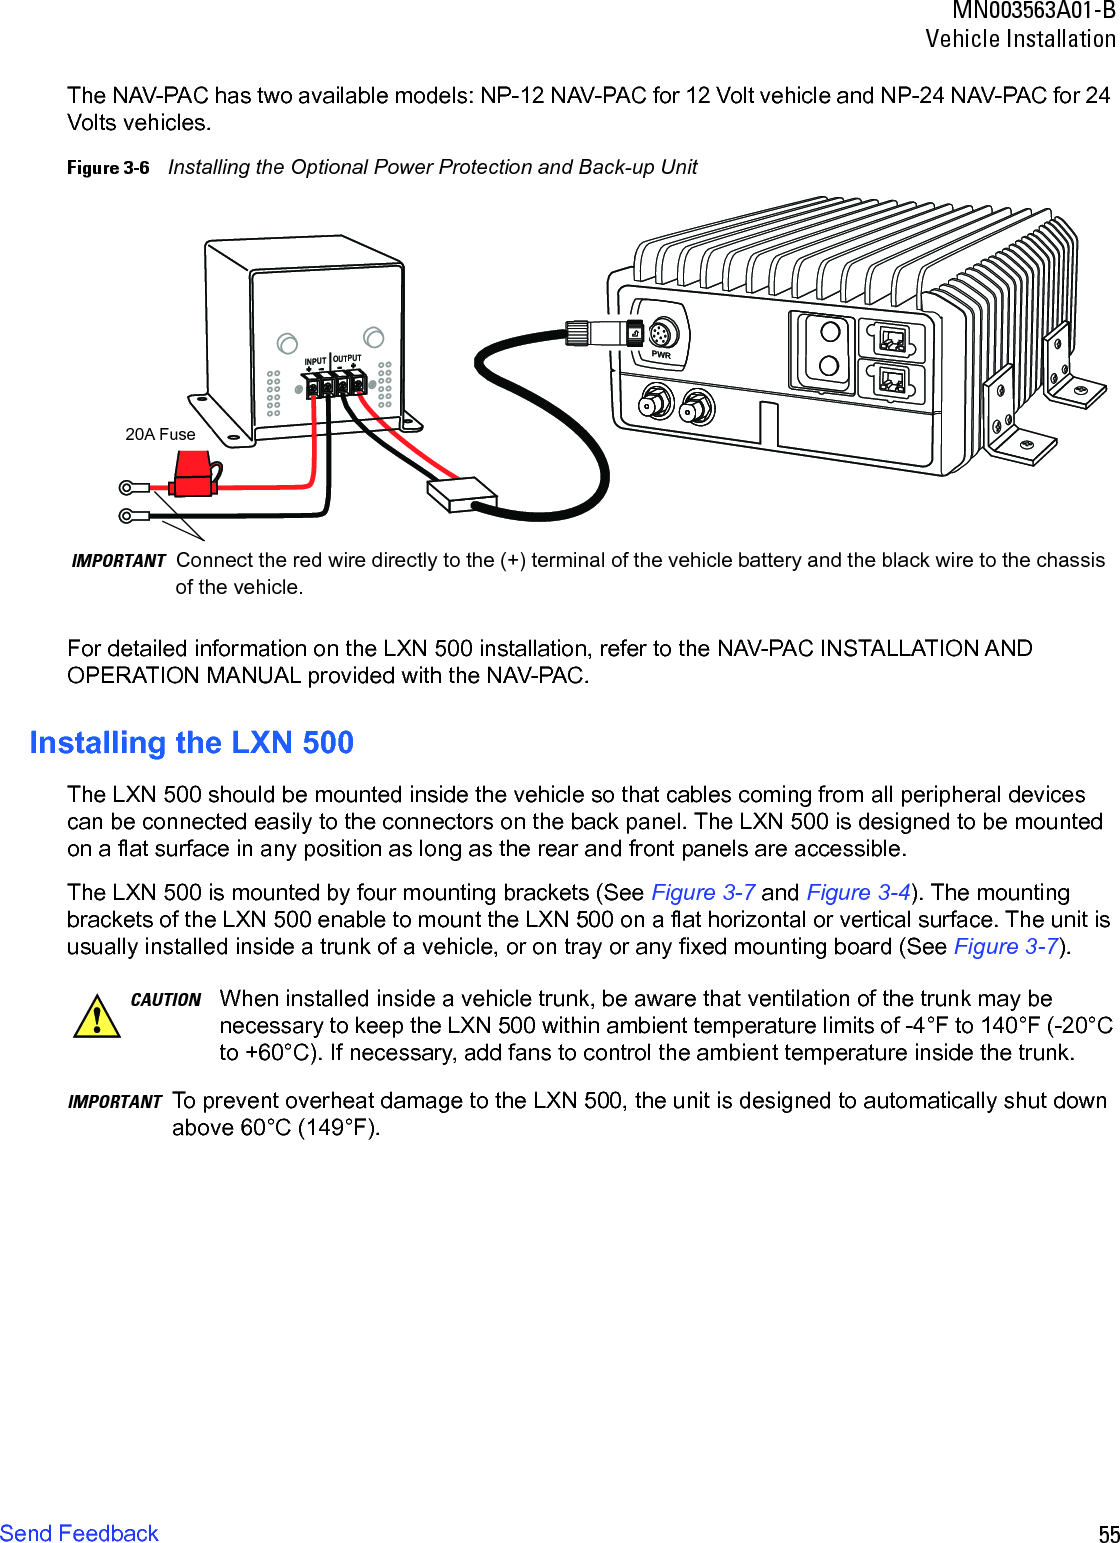 55MN003563A01-BVehicle InstallationSend FeedbackThe NAV-PAC has two available models: NP-12 NAV-PAC for 12 Volt vehicle and NP-24 NAV-PAC for 24 Volts vehicles.Figure 3-6    Installing the Optional Power Protection and Back-up UnitFor detailed information on the LXN 500 installation, refer to the NAV-PAC INSTALLATION AND OPERATION MANUAL provided with the NAV-PAC.Installing the LXN 500The LXN 500 should be mounted inside the vehicle so that cables coming from all peripheral devices can be connected easily to the connectors on the back panel. The LXN 500 is designed to be mounted on a flat surface in any position as long as the rear and front panels are accessible.The LXN 500 is mounted by four mounting brackets (See Figure 3-7 and Figure 3-4). The mounting brackets of the LXN 500 enable to mount the LXN 500 on a flat horizontal or vertical surface. The unit is usually installed inside a trunk of a vehicle, or on tray or any fixed mounting board (See Figure 3-7).IMPORTANT To prevent overheat damage to the LXN 500, the unit is designed to automatically shut down above 60°C (149°F).PWRINPUTOUTPUT+ -+ -+ -+ -IMPORTANT Connect the red wire directly to the (+) terminal of the vehicle battery and the black wire to the chassis of the vehicle.20A FuseCAUTION When installed inside a vehicle trunk, be aware that ventilation of the trunk may be necessary to keep the LXN 500 within ambient temperature limits of -4°F to 140°F (-20°C to +60°C). If necessary, add fans to control the ambient temperature inside the trunk.